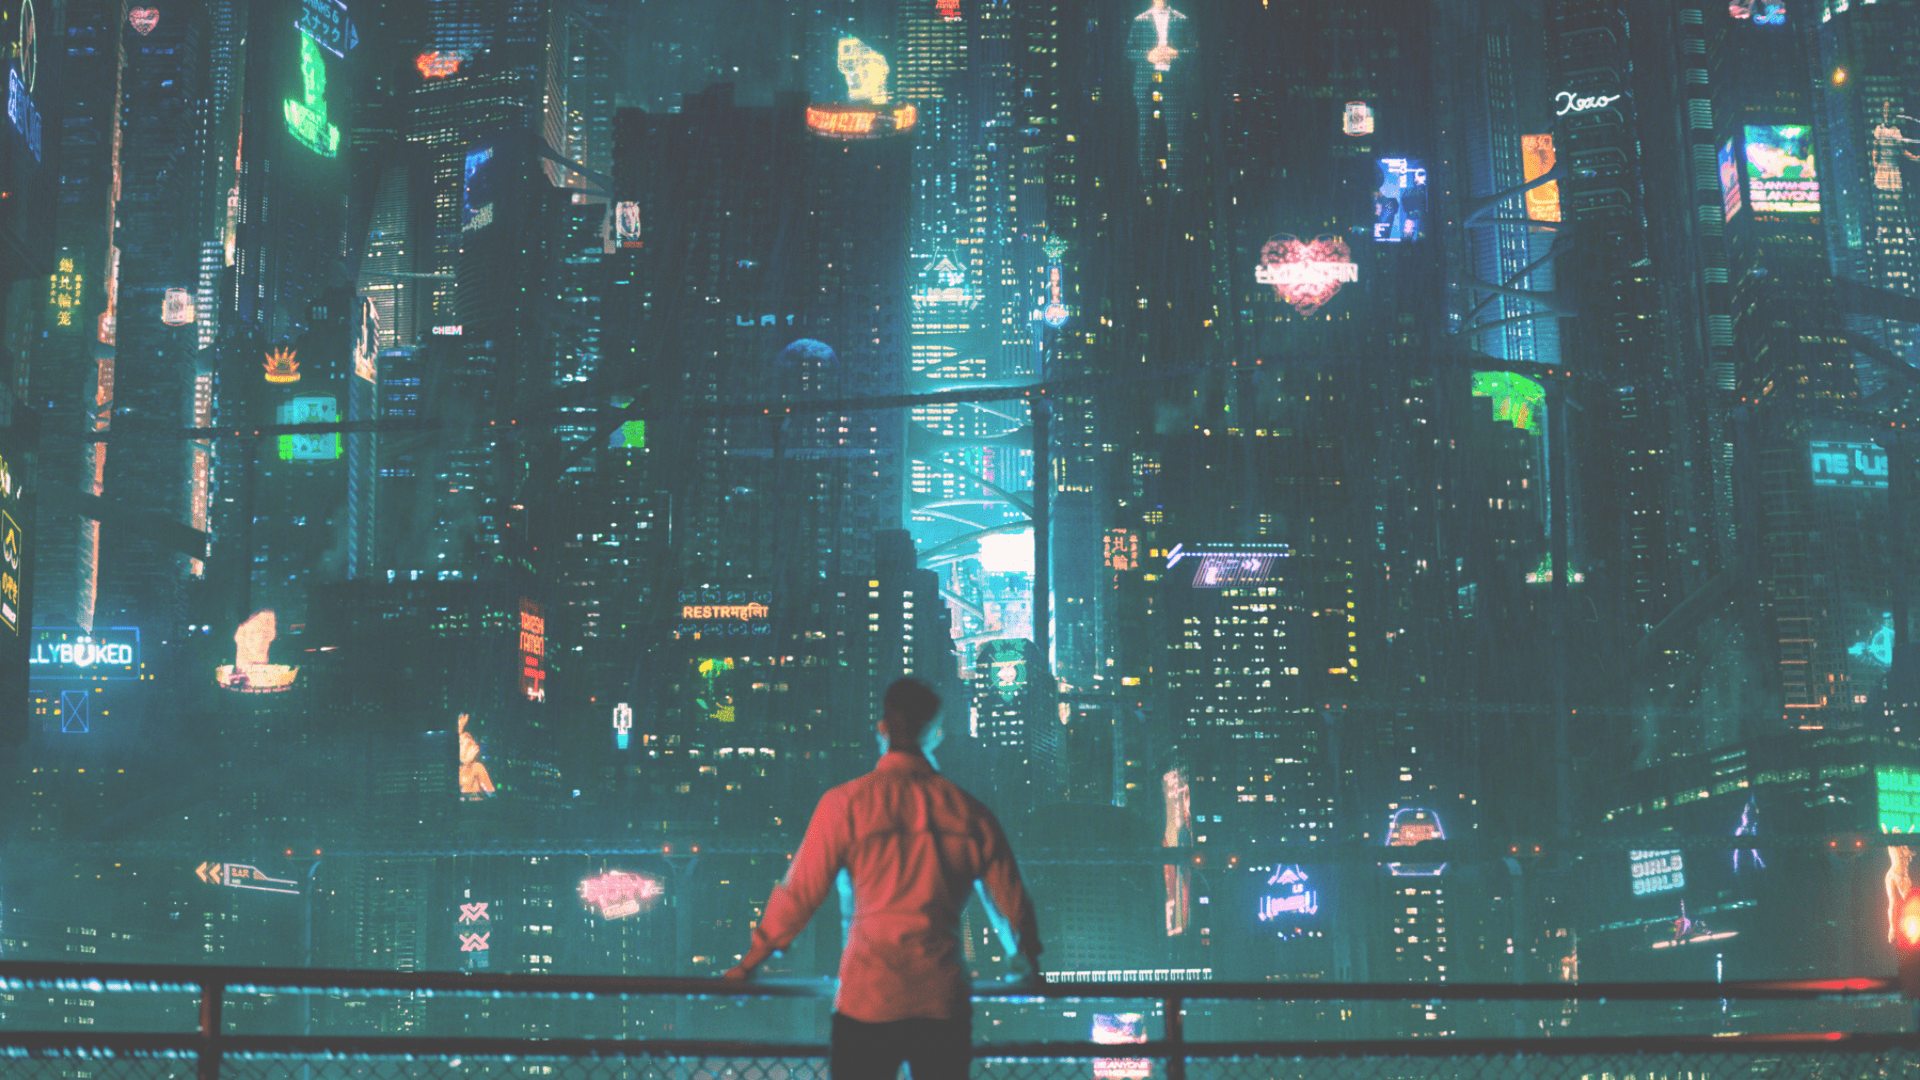 Stacks & sleeves: Identity in the 'Altered Carbon' universe